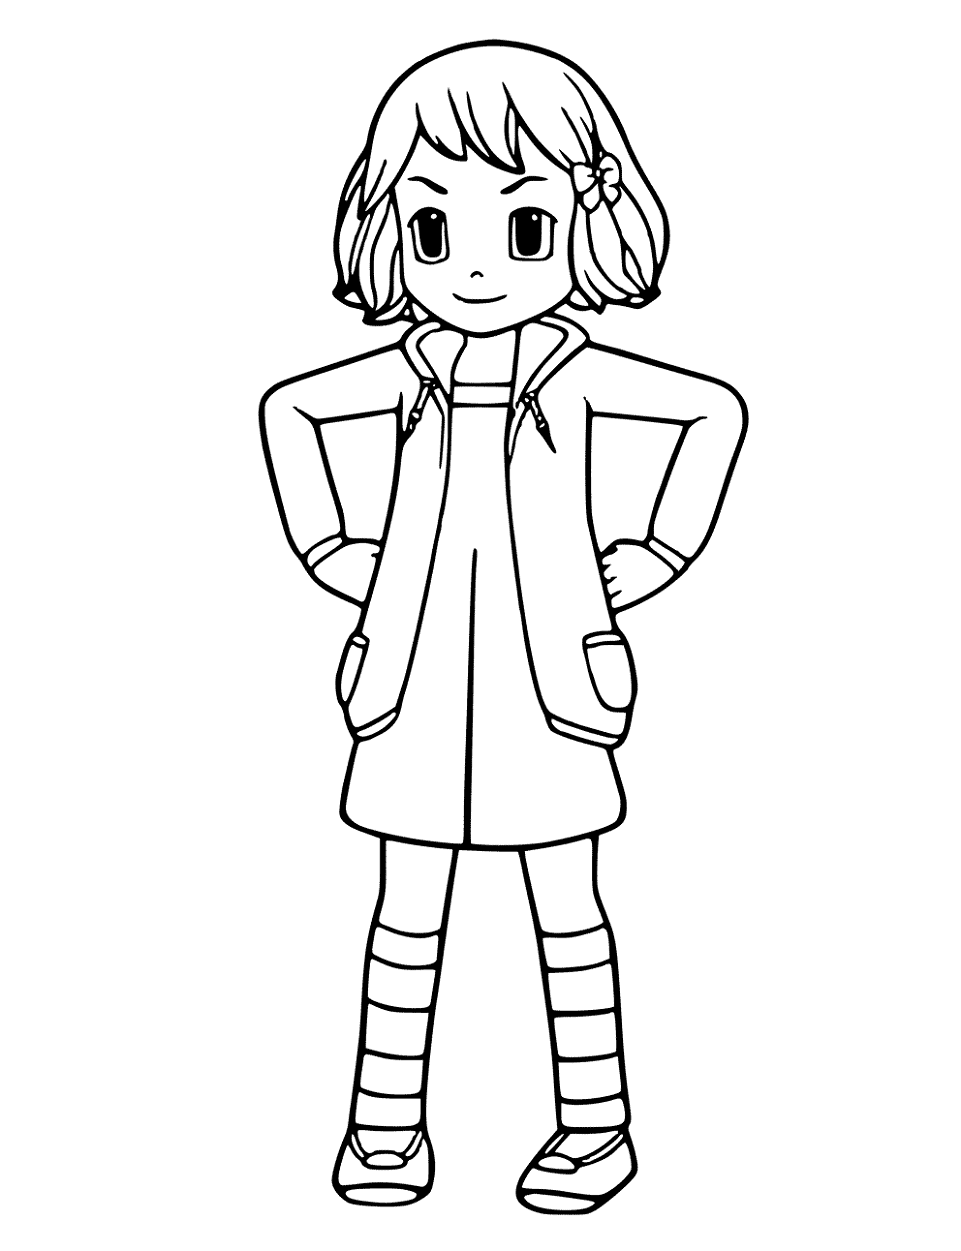 Dolly from Tobot Coloring Page